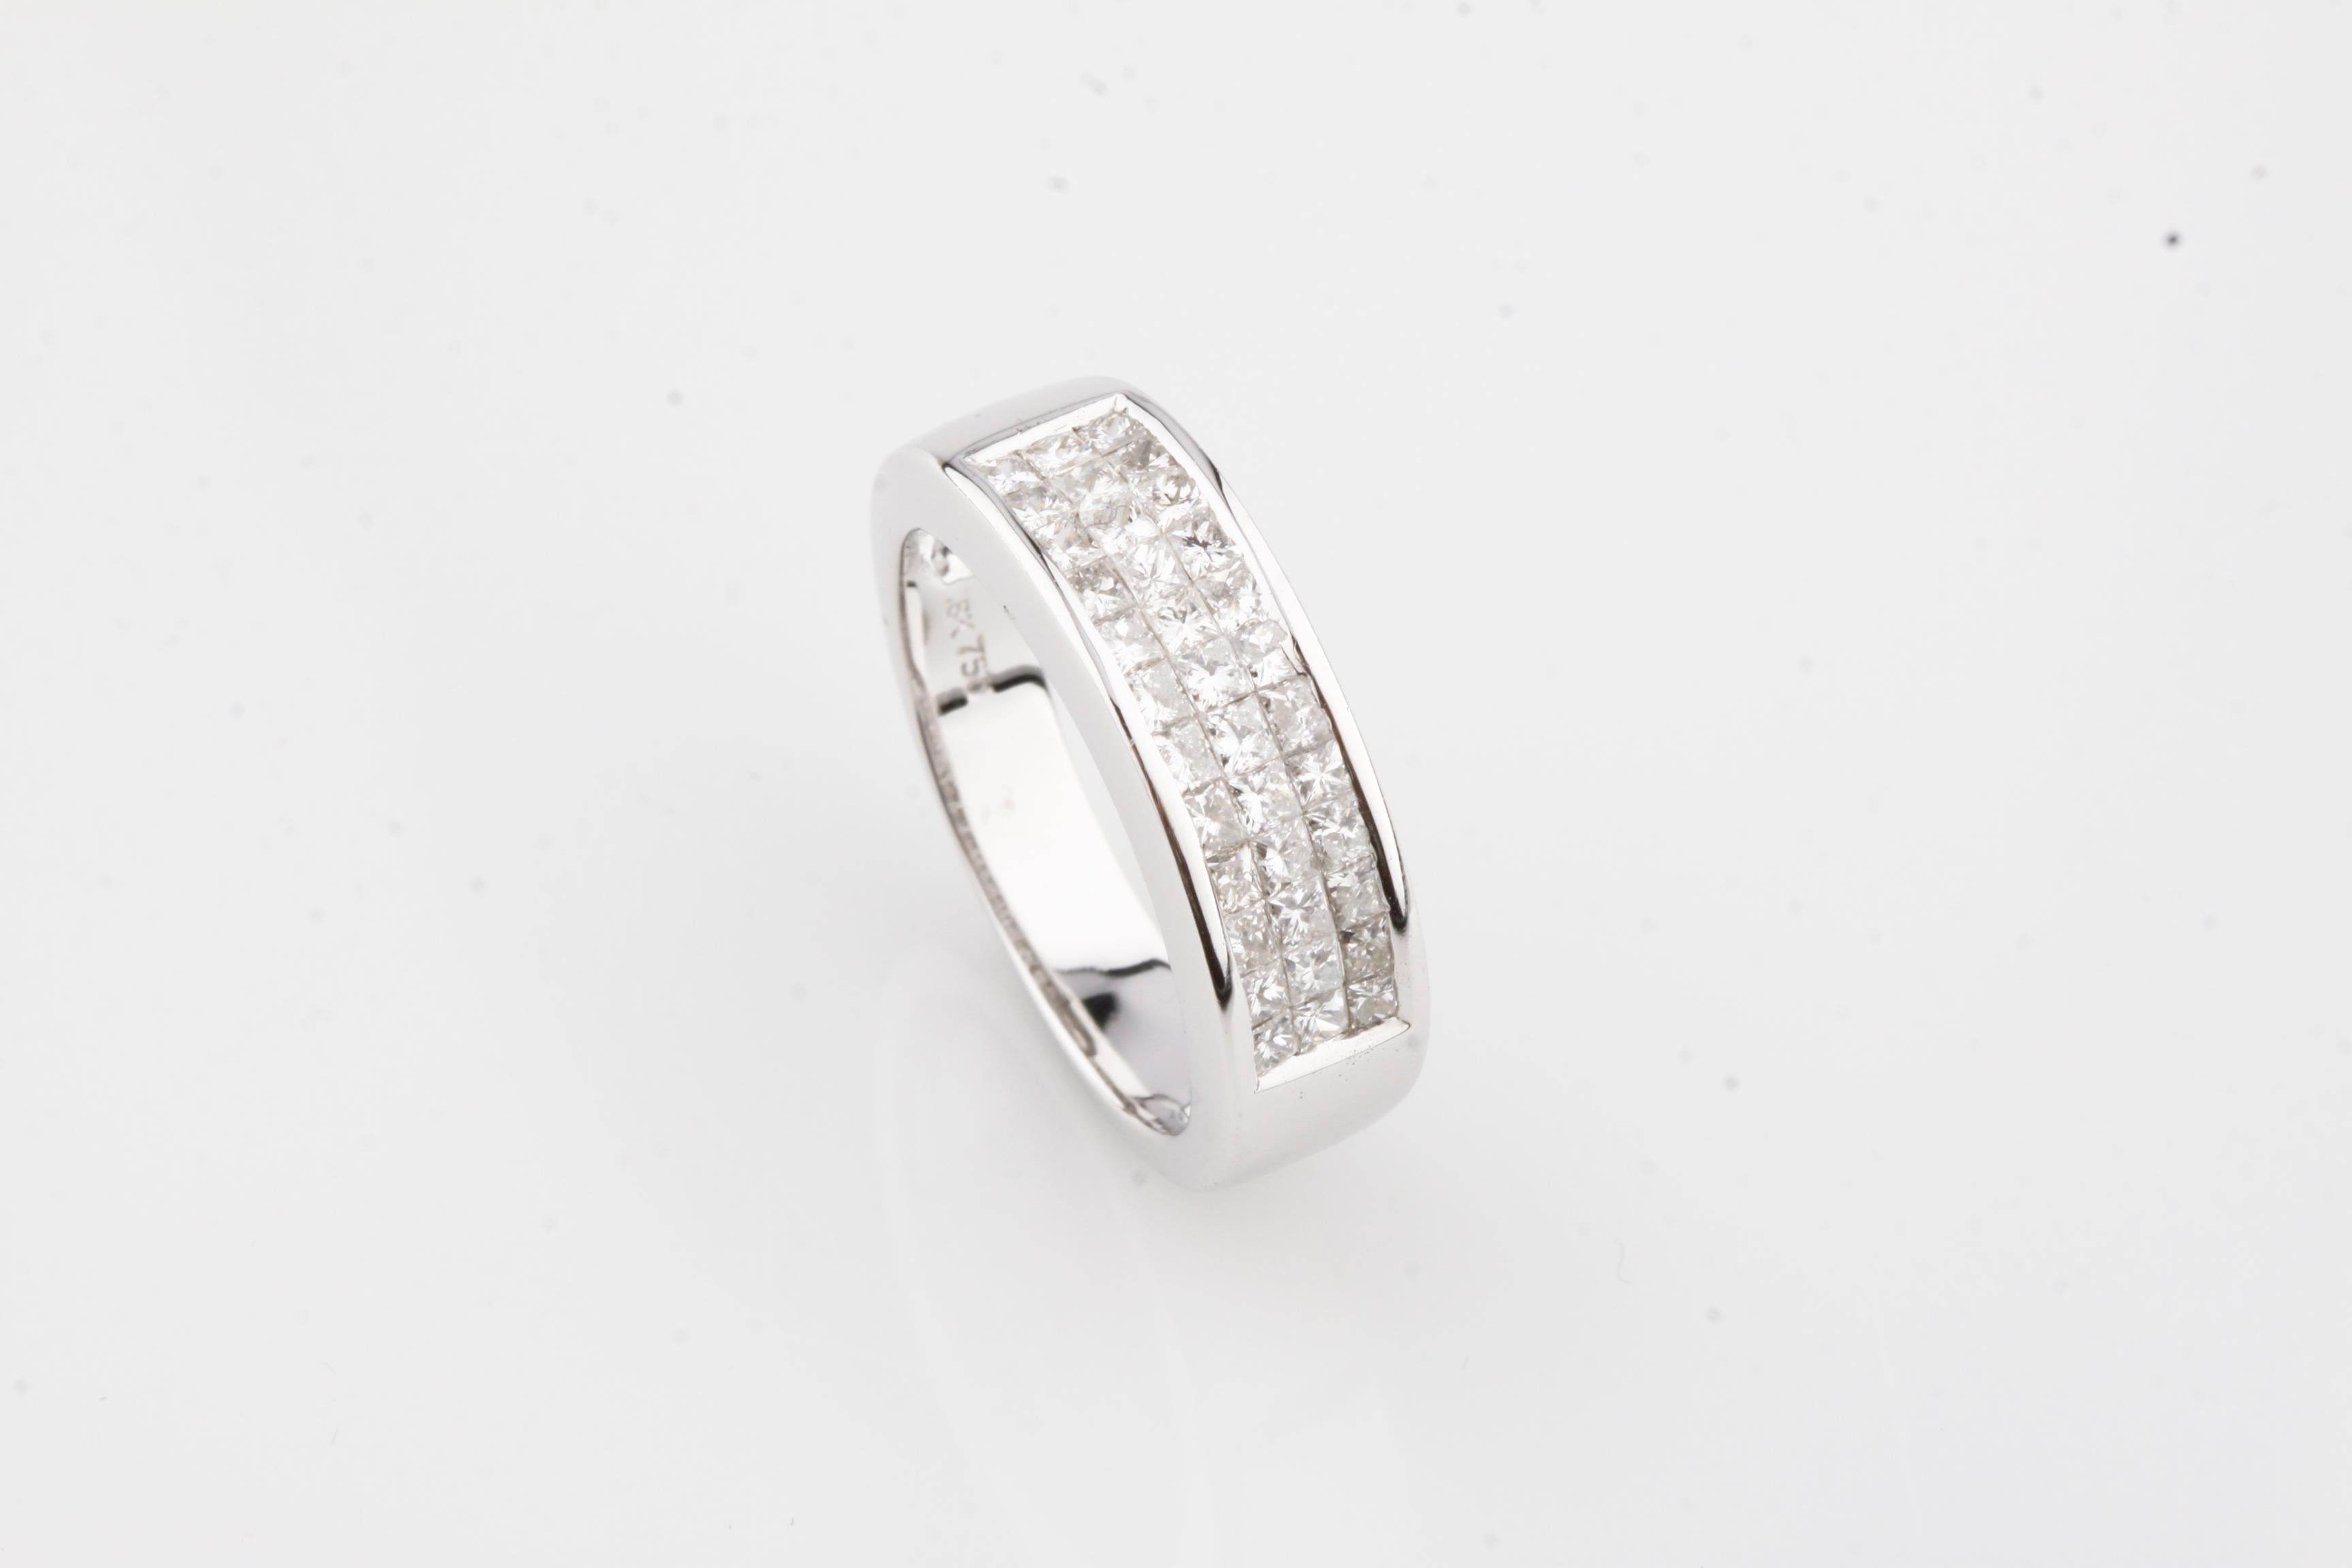 Gorgeous Plaque Ring
Features 36 Invisible Set Princess Cut Stones in a Plaque Setting
Total Diamond Weight = Appx 1.10 ct
Total Mass = 6.9 grams